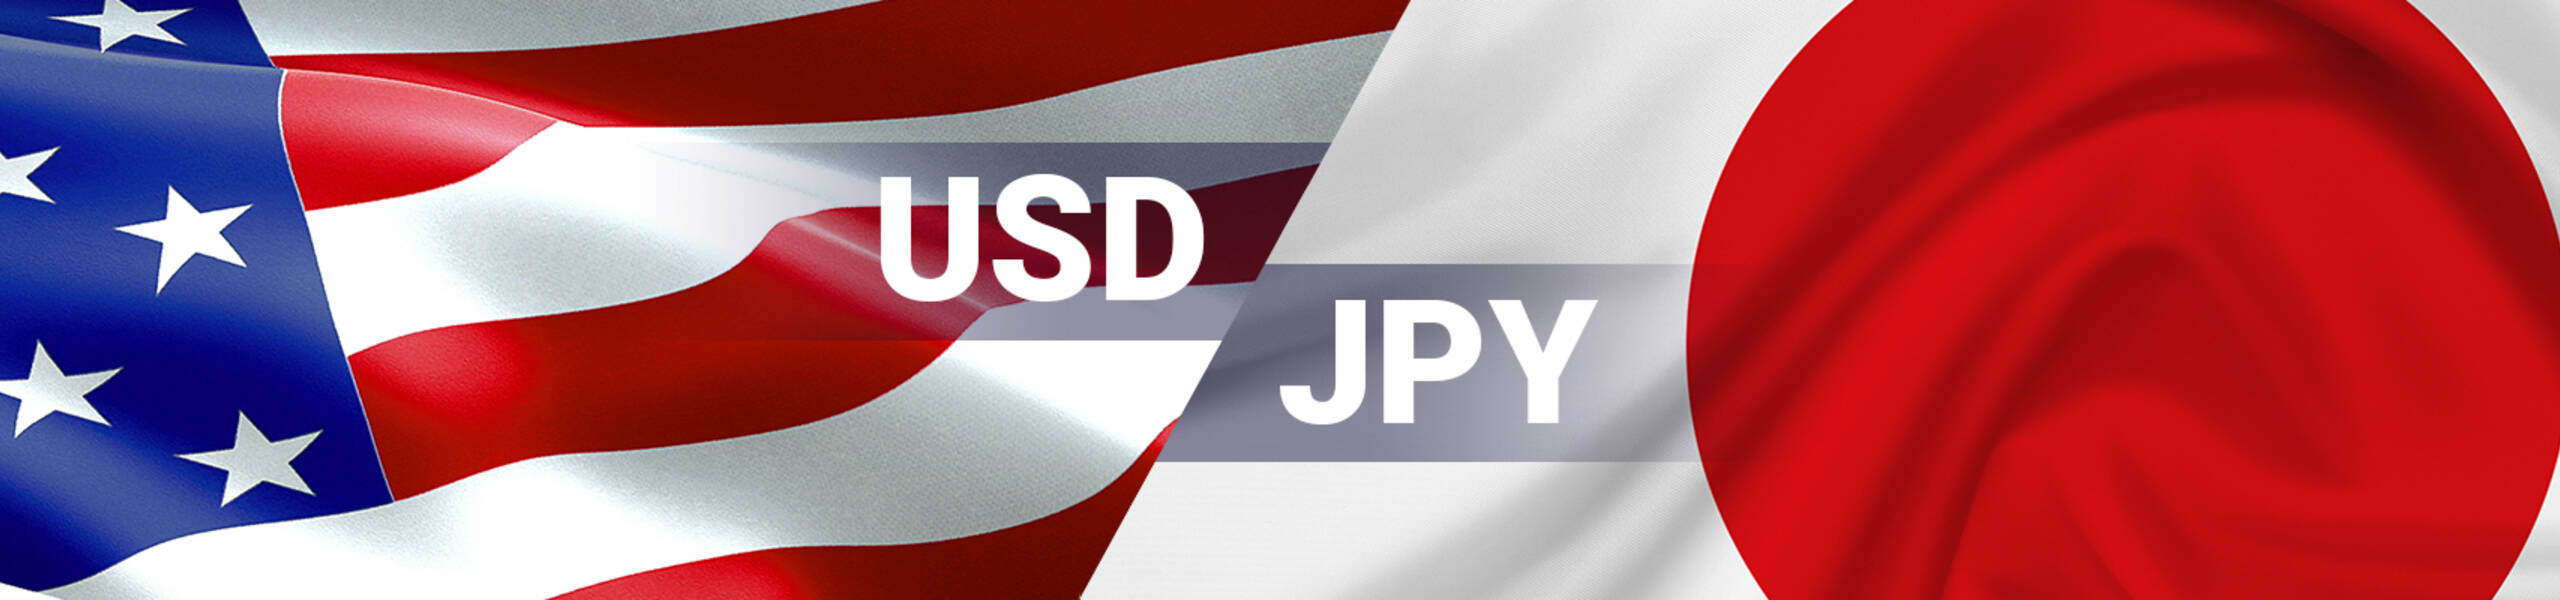 USD/JPY Dailyレポート 2017/08/14